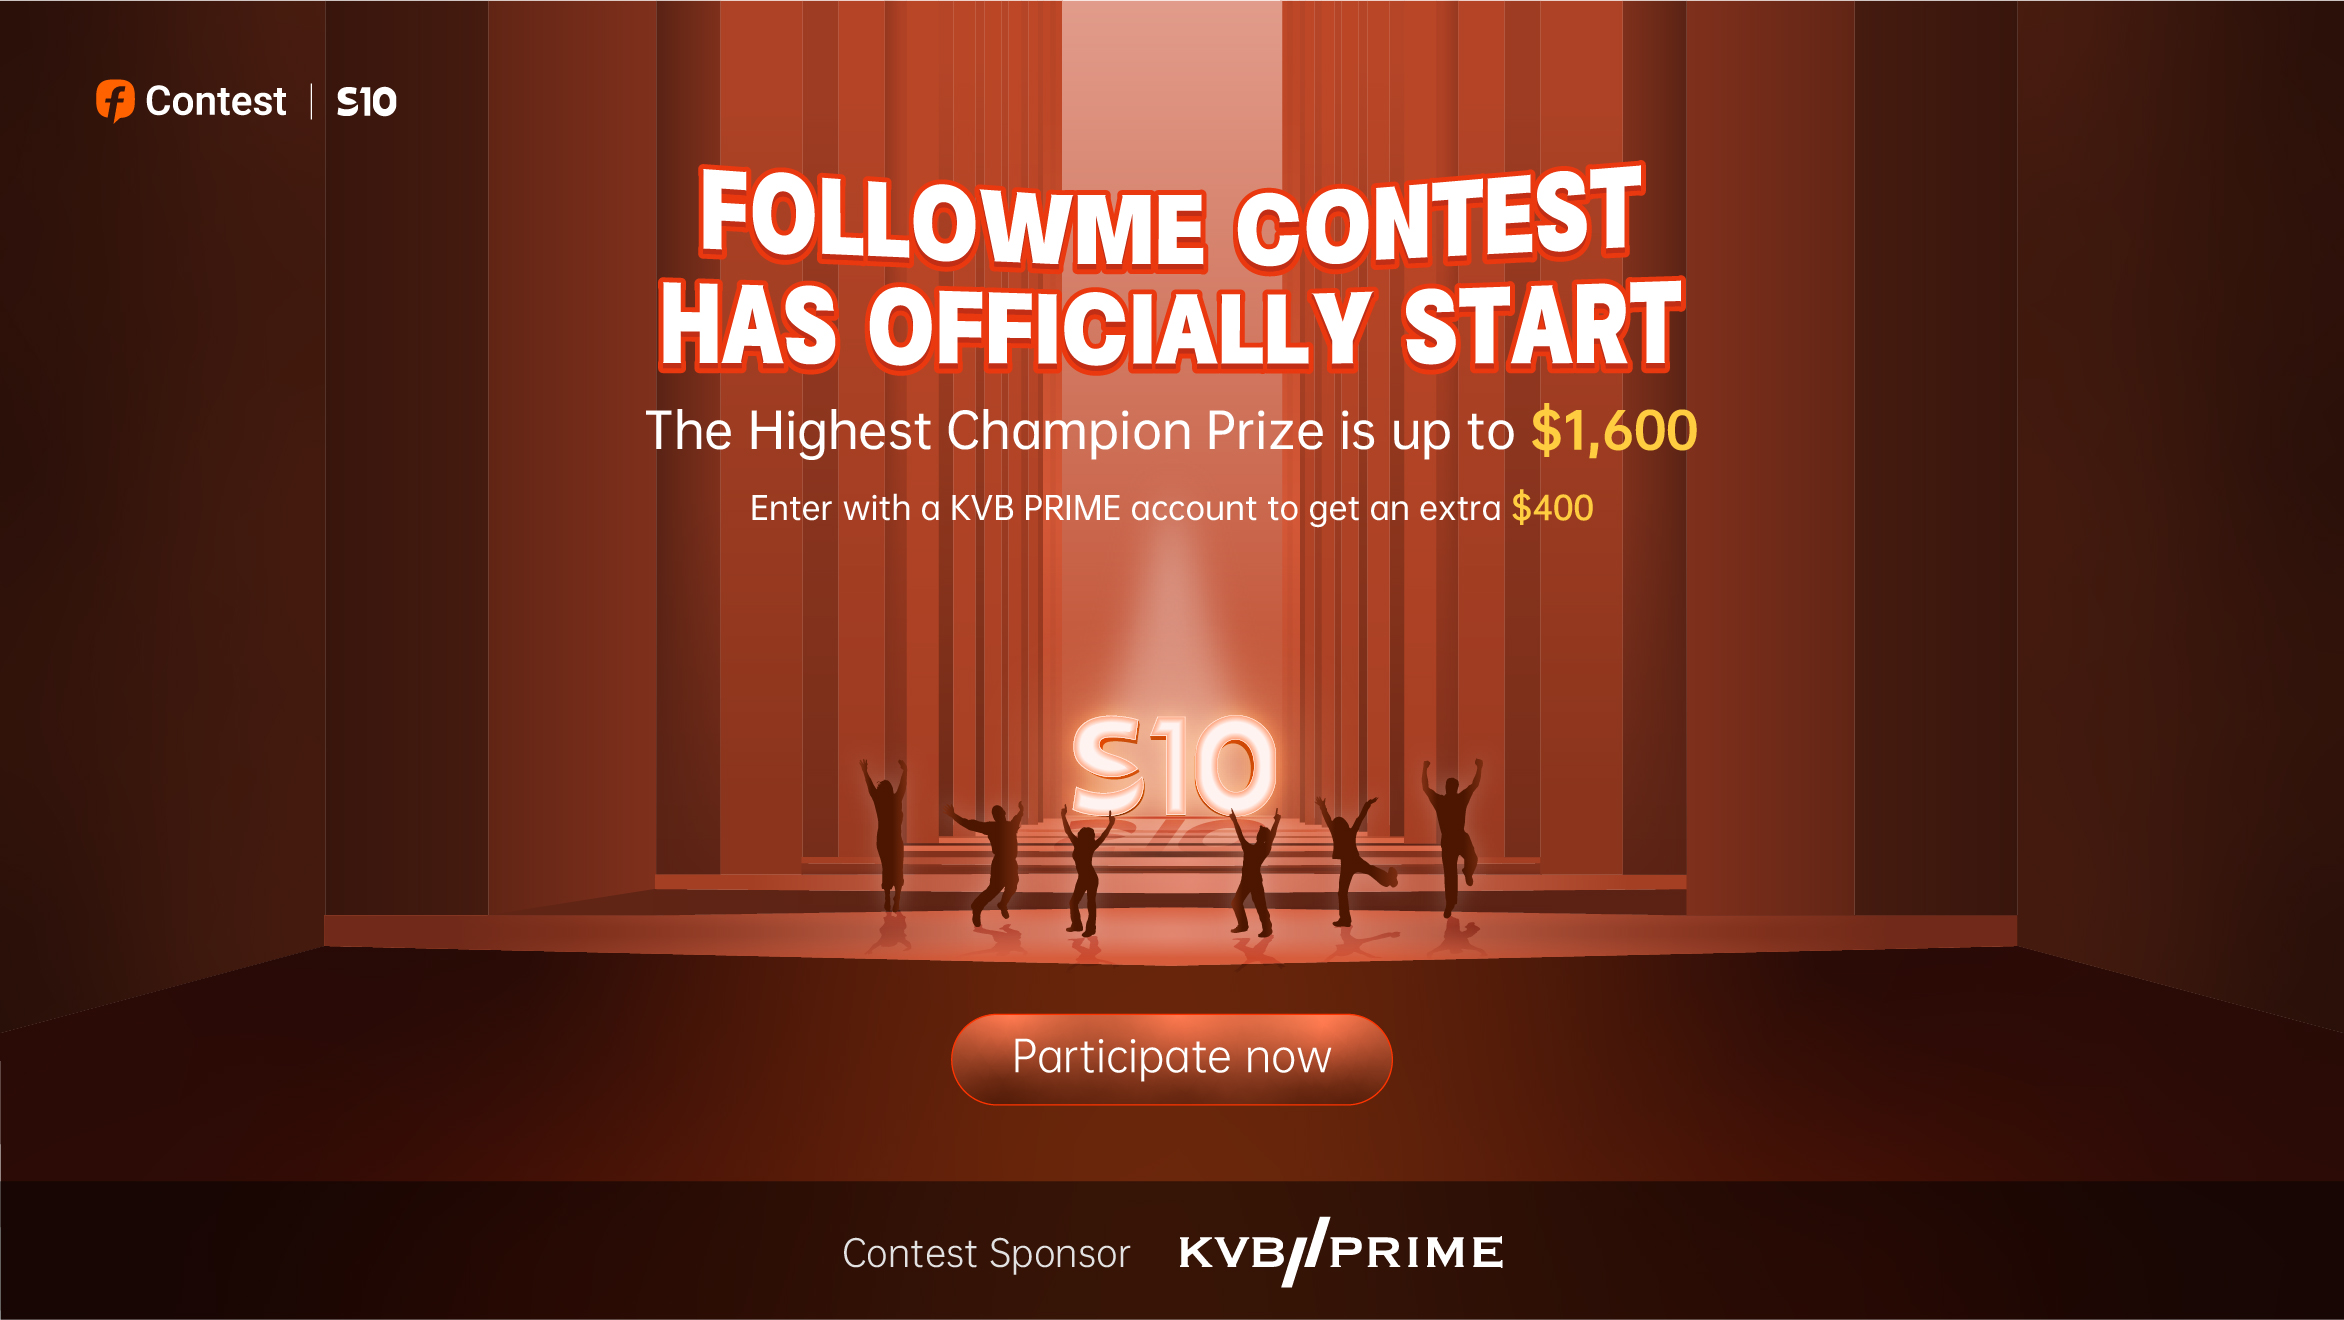 Contest News: The competition officially BEGINS NOW!